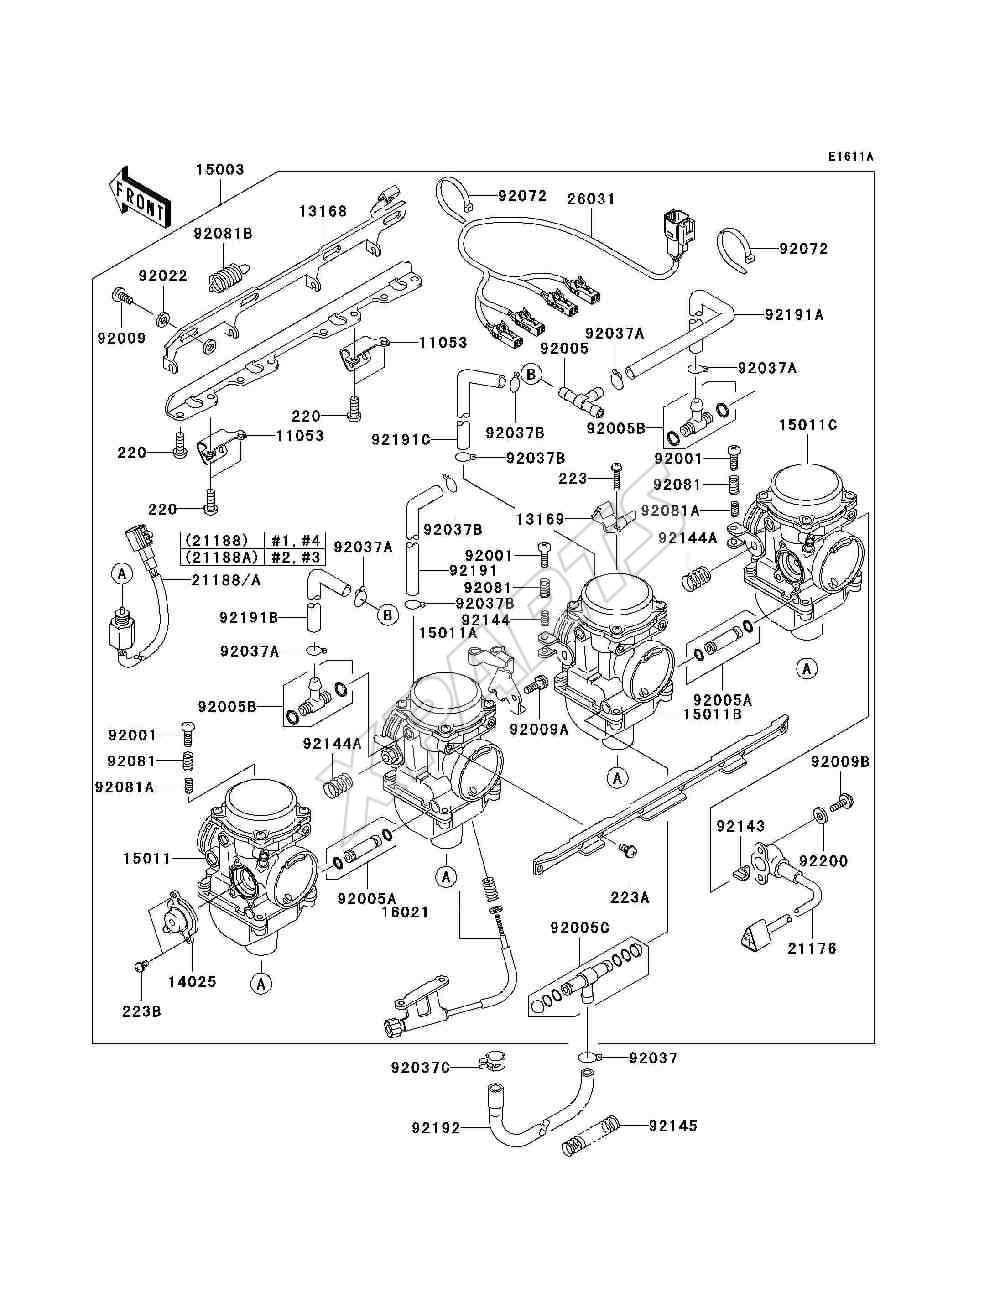 Picture for category Carburetor(CA)